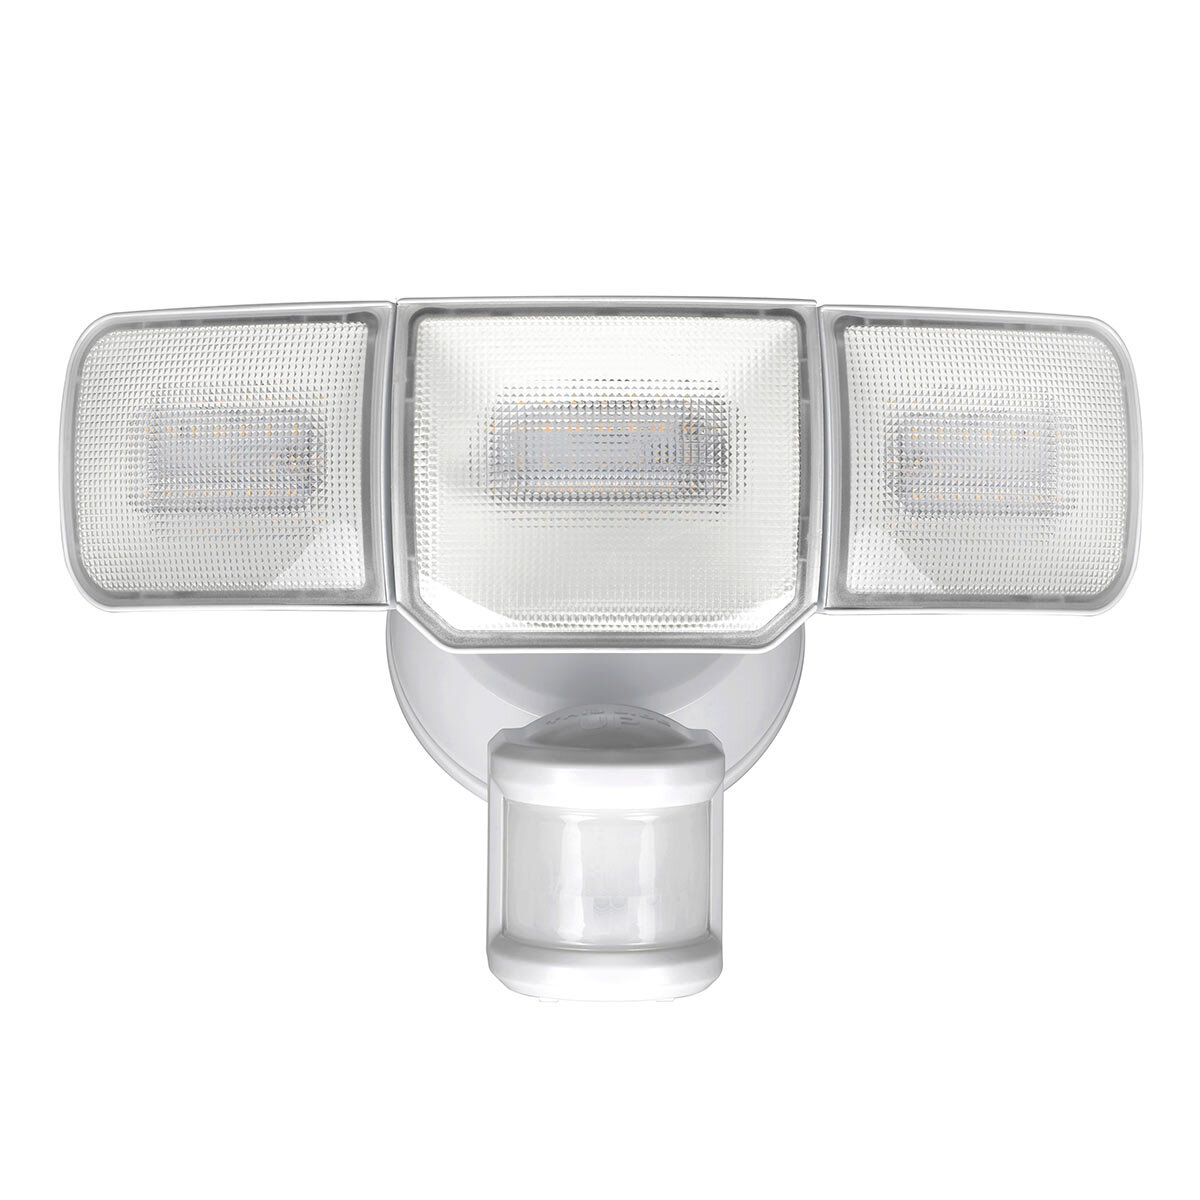 image of 3 head security light